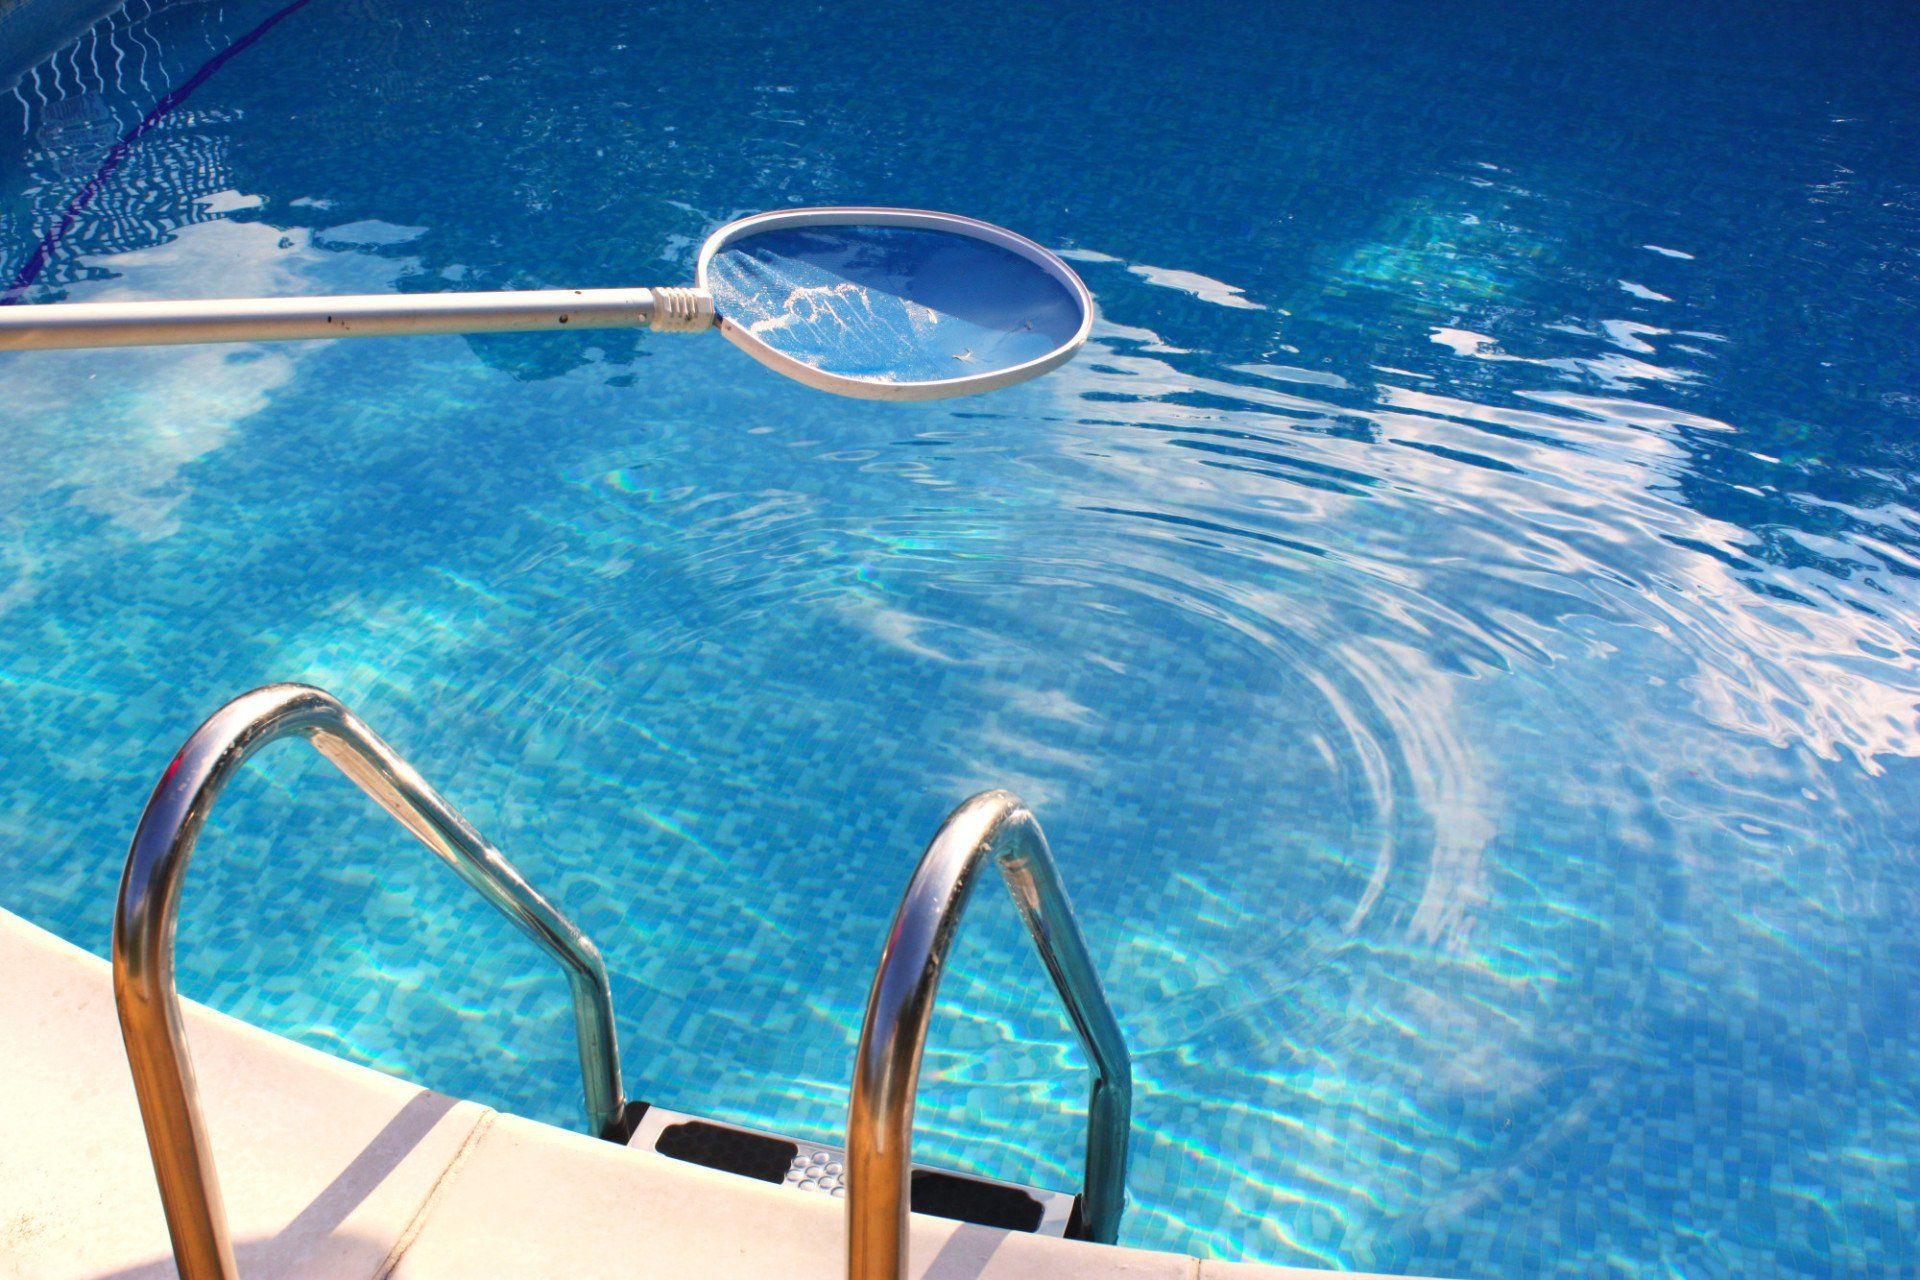 How to Start a Pool Cleaning Business - TRUiC